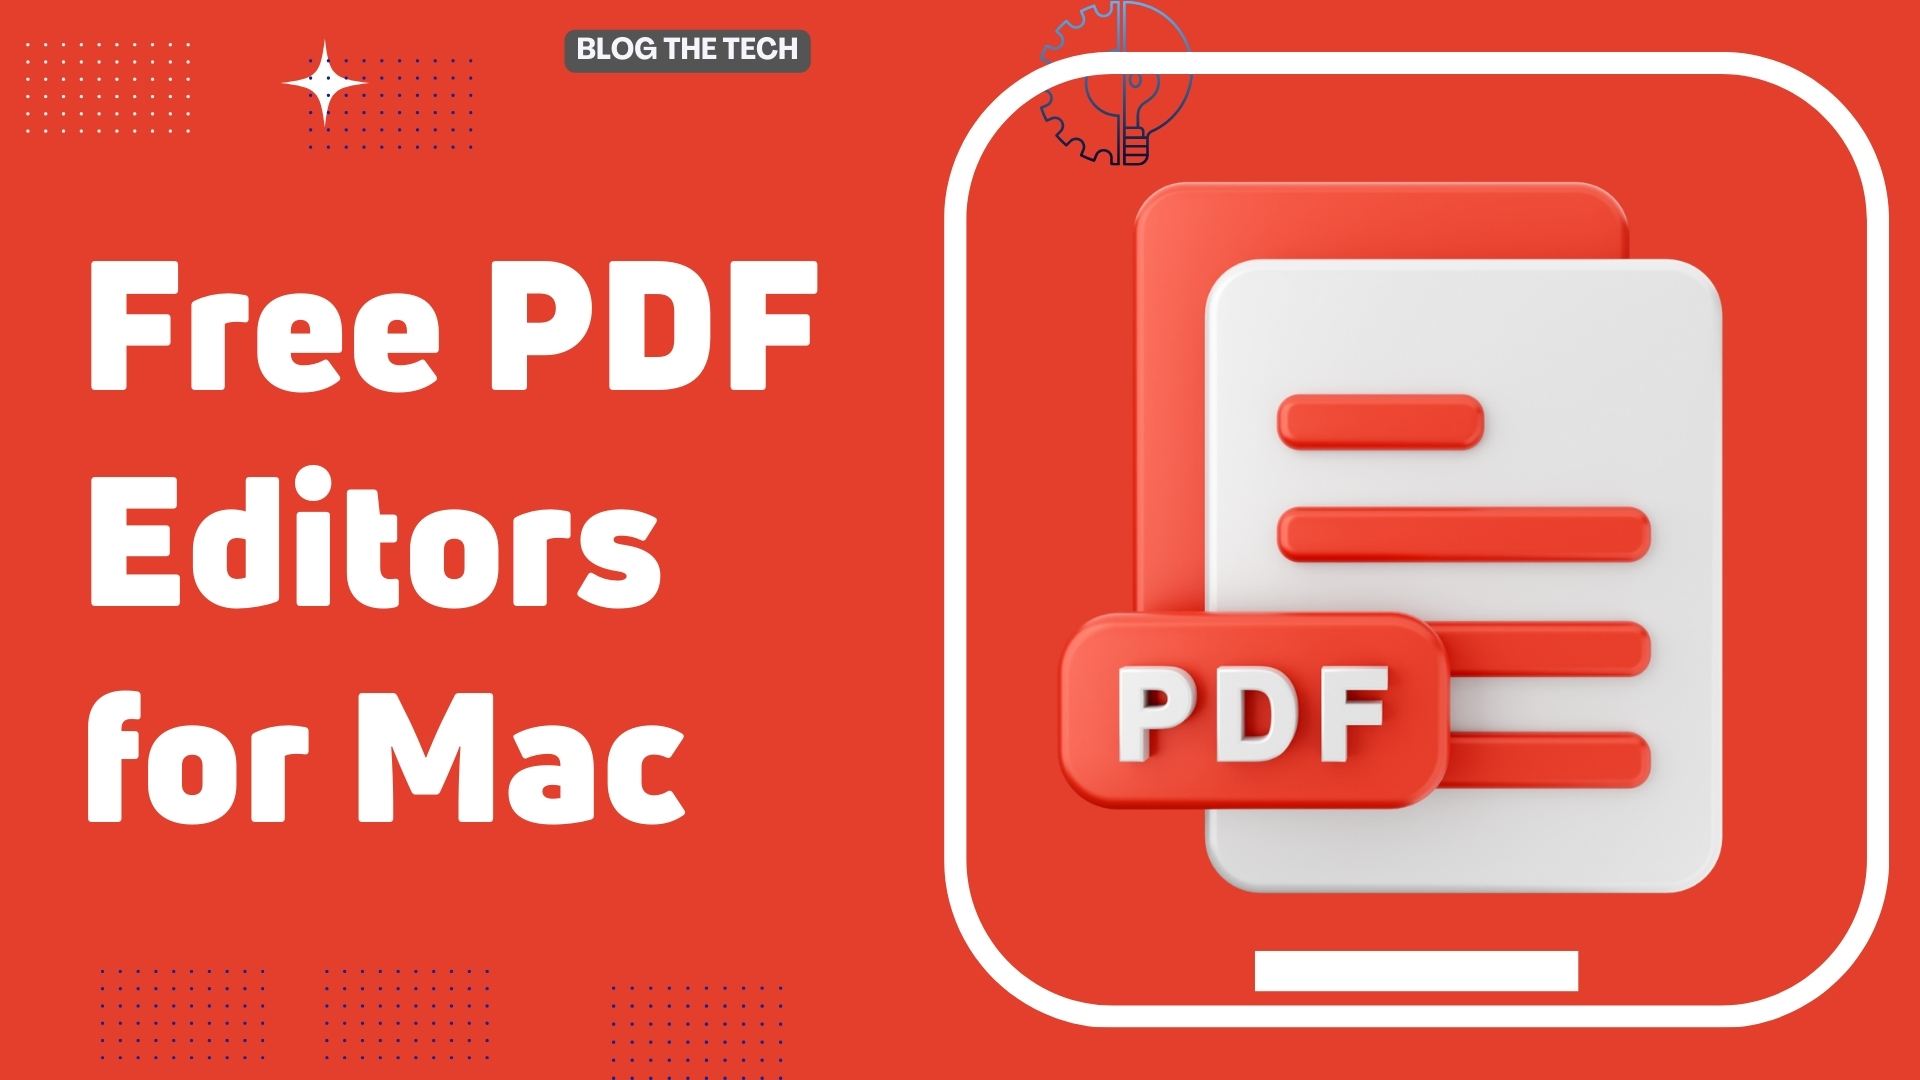 Free-PDF-Editors-for-Mac-Featured